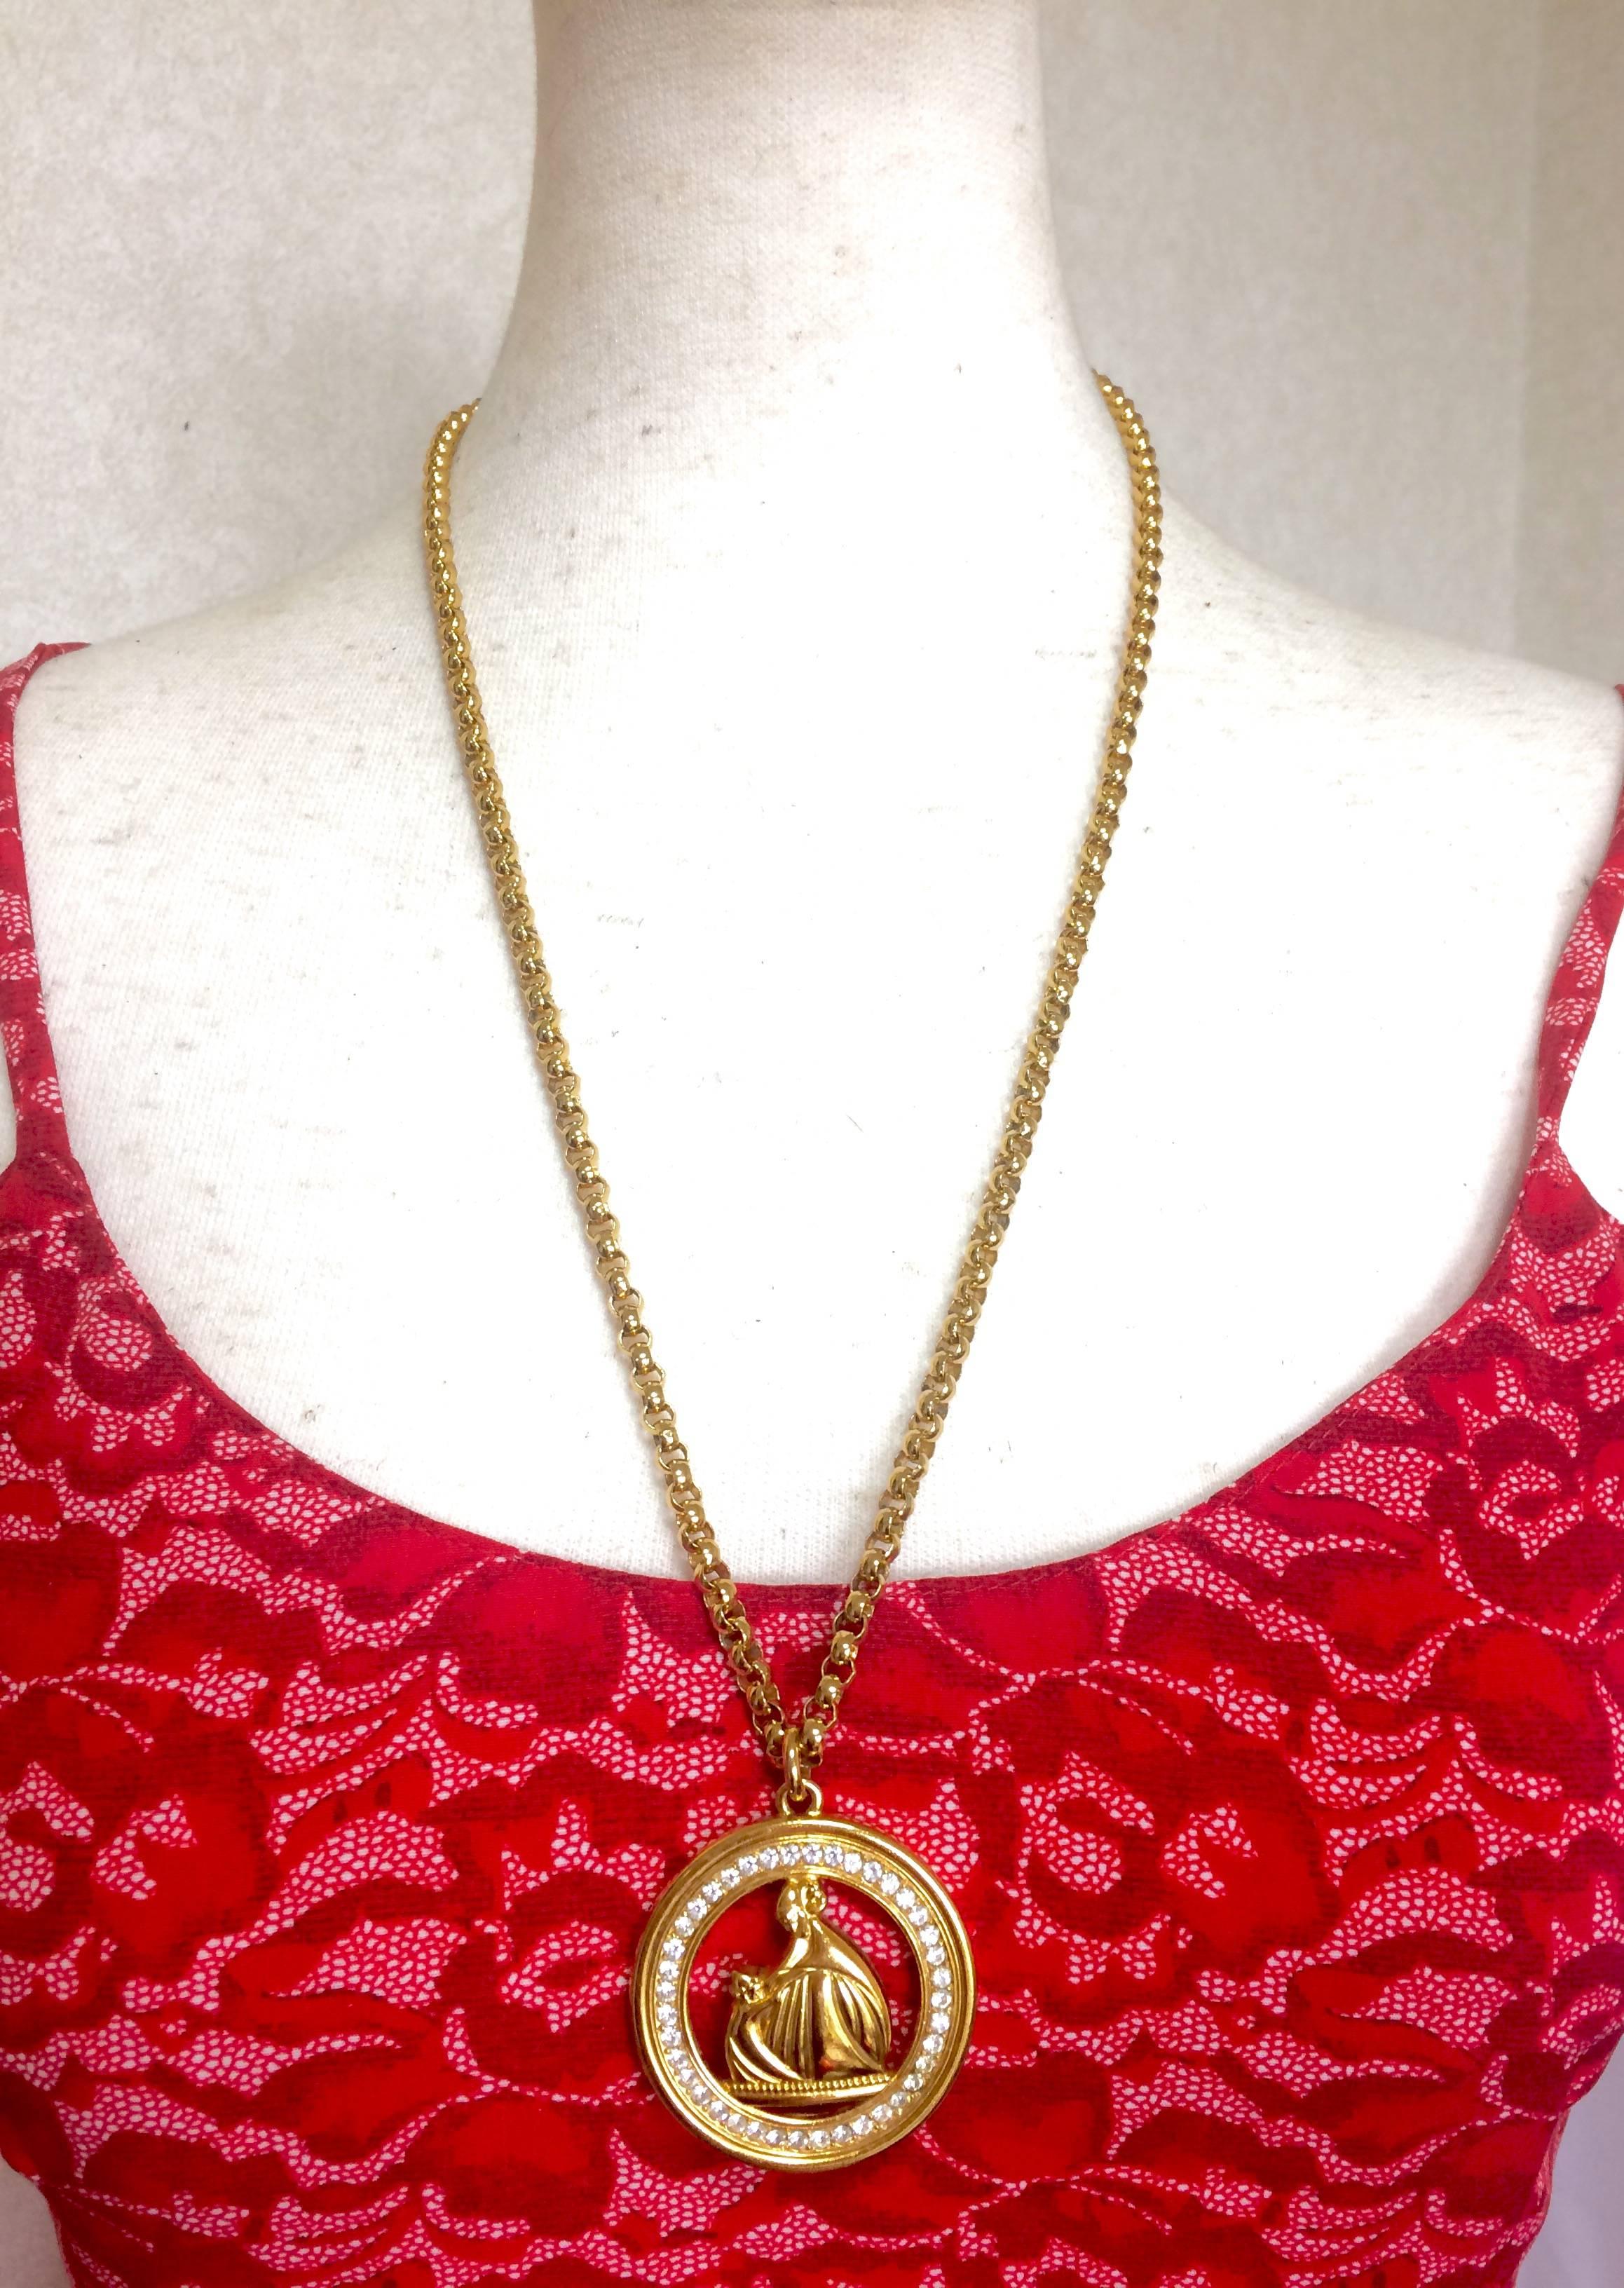 1990s. MINT. Vintage LANVIN golden chain necklace with large round logo pendant top with crystal stones. Perfect vintage jewelry. Germany made. 

MINT condition! Beautiful jewelry piece from LANVIN. Great gift idea. Free gift wrapping. 

Introducing